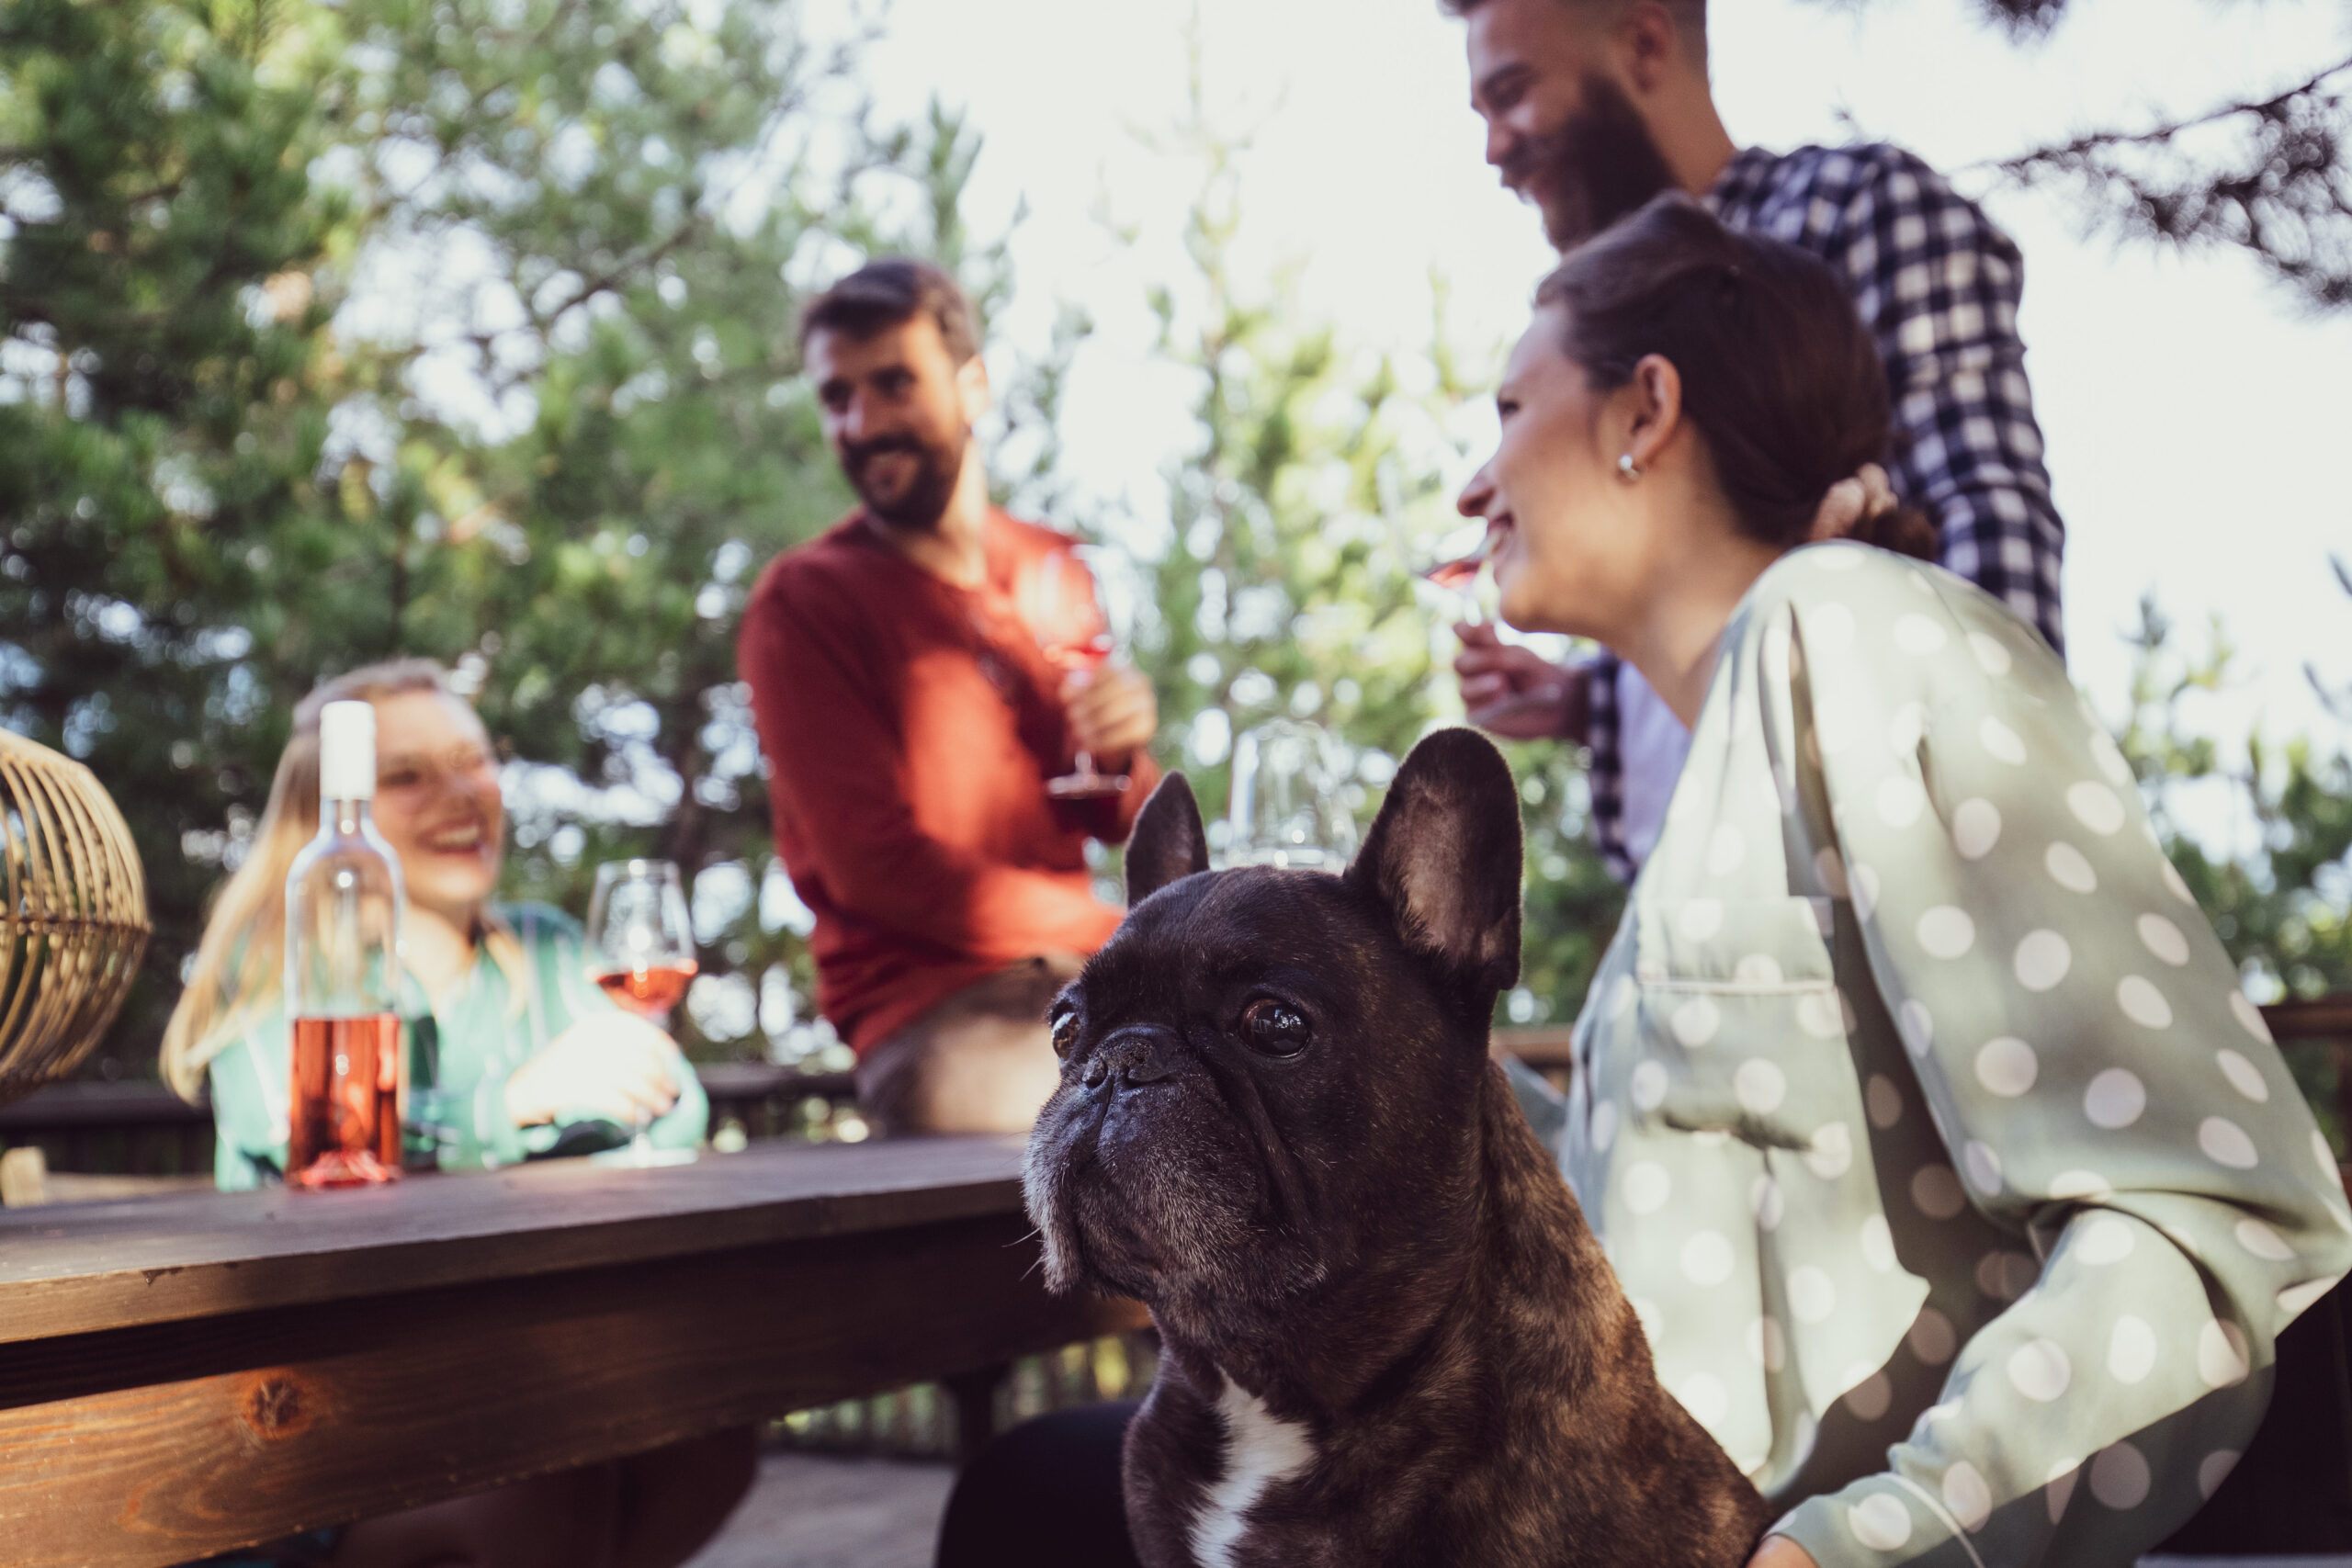 An image depicting four friends drinking wine on the balcony and having lots of fun together. A cute french bulldog is also enjoying the afternoon with them.